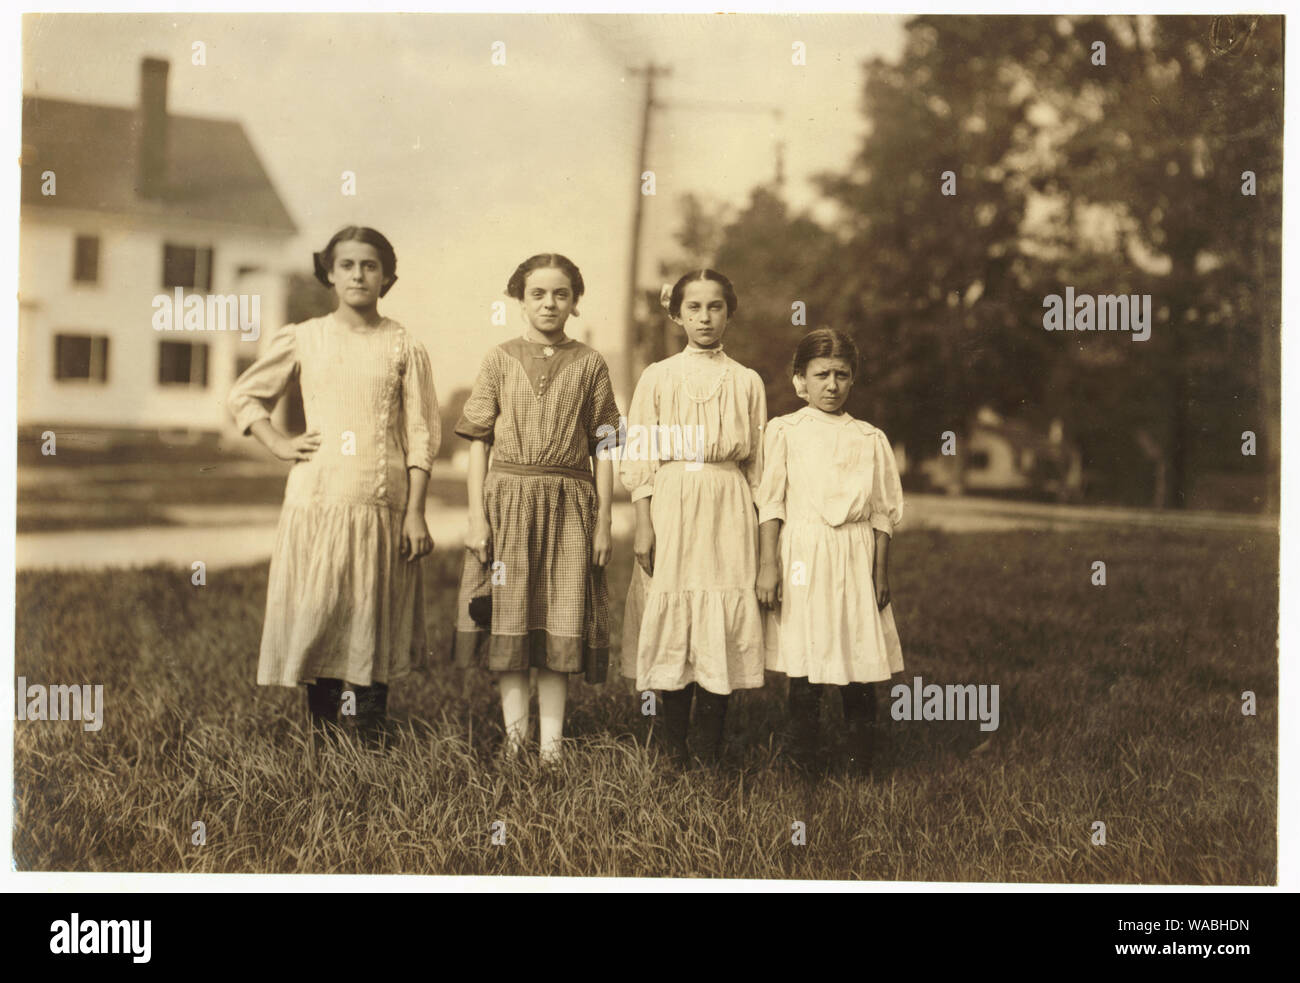 Comparison of ages: On right end is Mary Deschene, admitted 11 years, helped sister spool all summer in Glenallen Mill. Next her is Lumina Demarais, admitted 12 years, and doffing all summer in Spring Village Mill. Next is Rosina Coyette, said she was 14 but Mr. Hine doubted it; has steady job doffing and spinning in Spring Village Mill. Left end is Eva Caonette, spinner in Spring Village Mall, said she was 14 but may not be. Abstract: Photographs from the records of the National Child Labor Committee (U.S.) Stock Photo